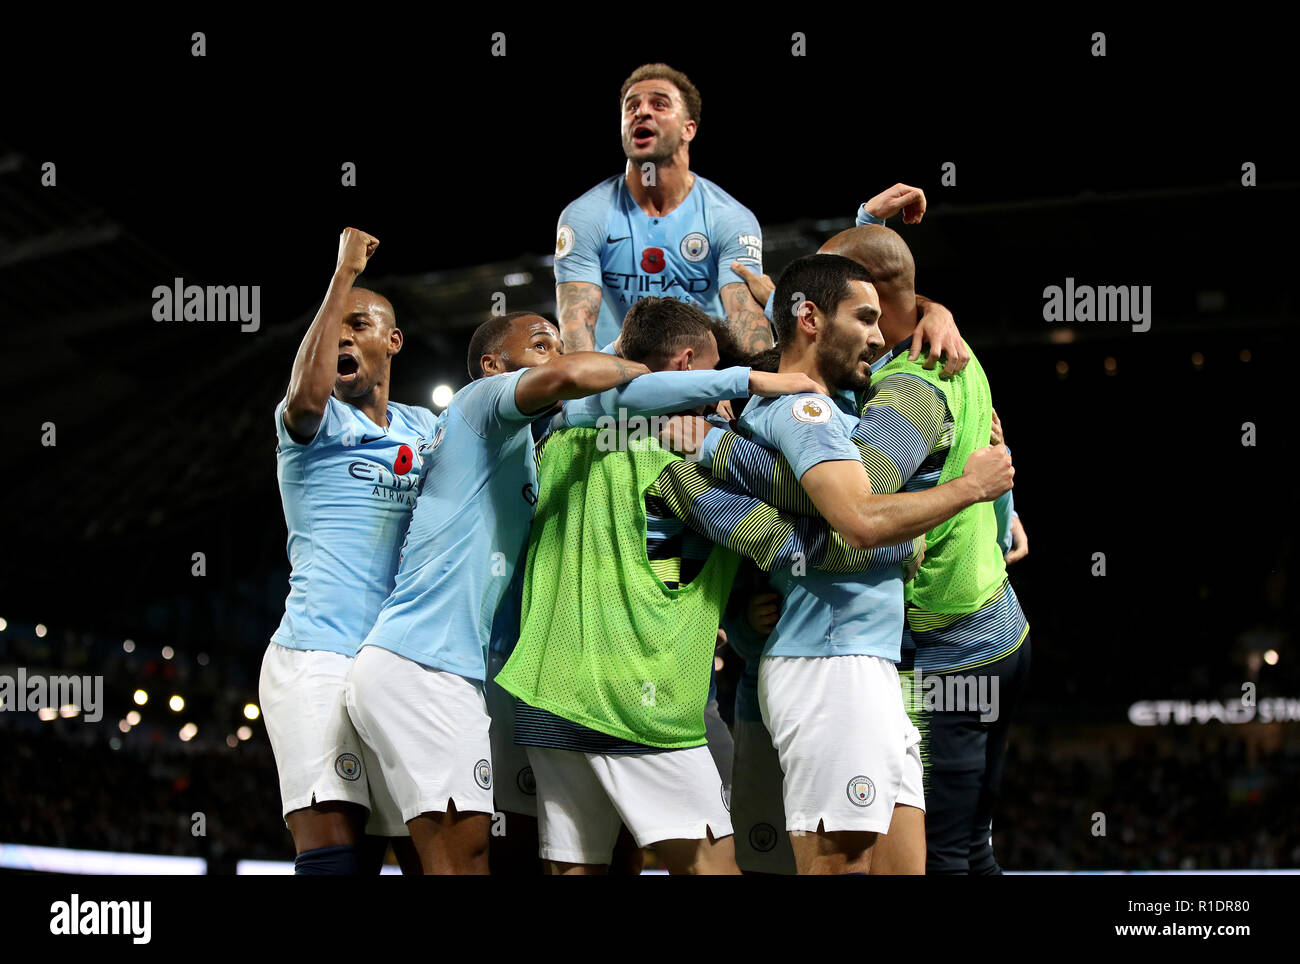 Manchester City's Ilkay Gundogan (right) celebrates scoring his side's third goal of the game with his team-mates during the Premier League match at the Etihad Stadium, Manchester. Stock Photo